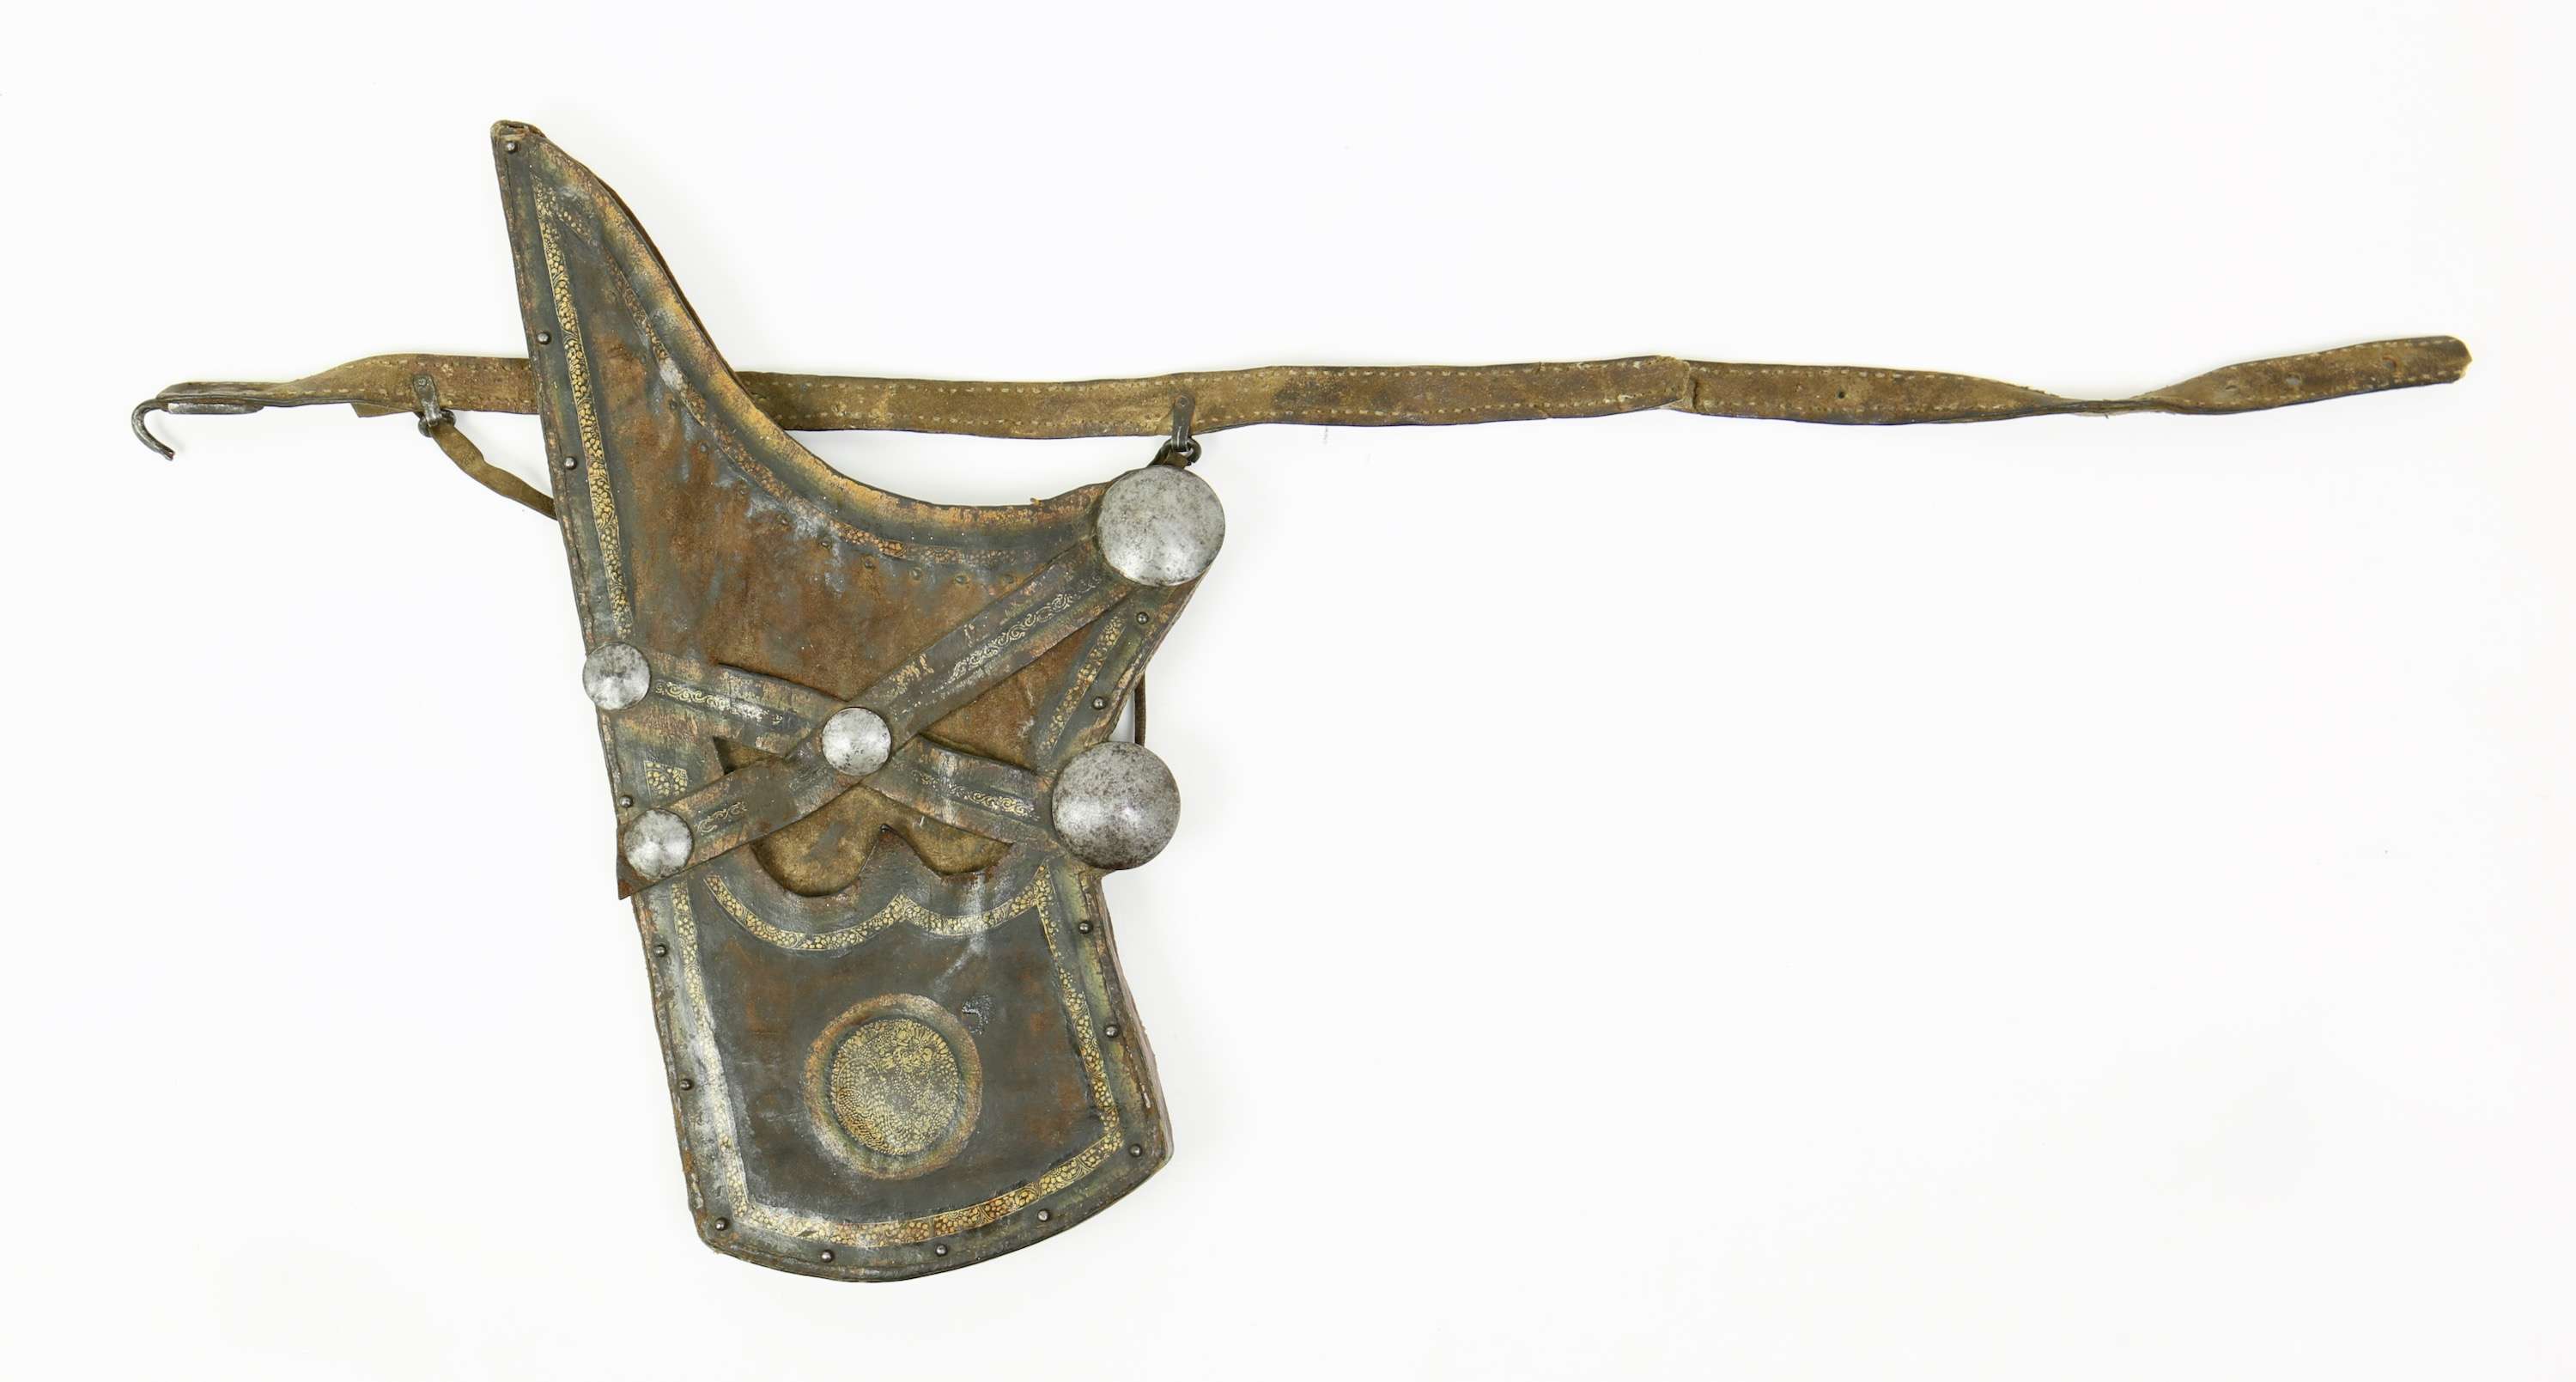 Tibetan or Mongolian quiver with belt